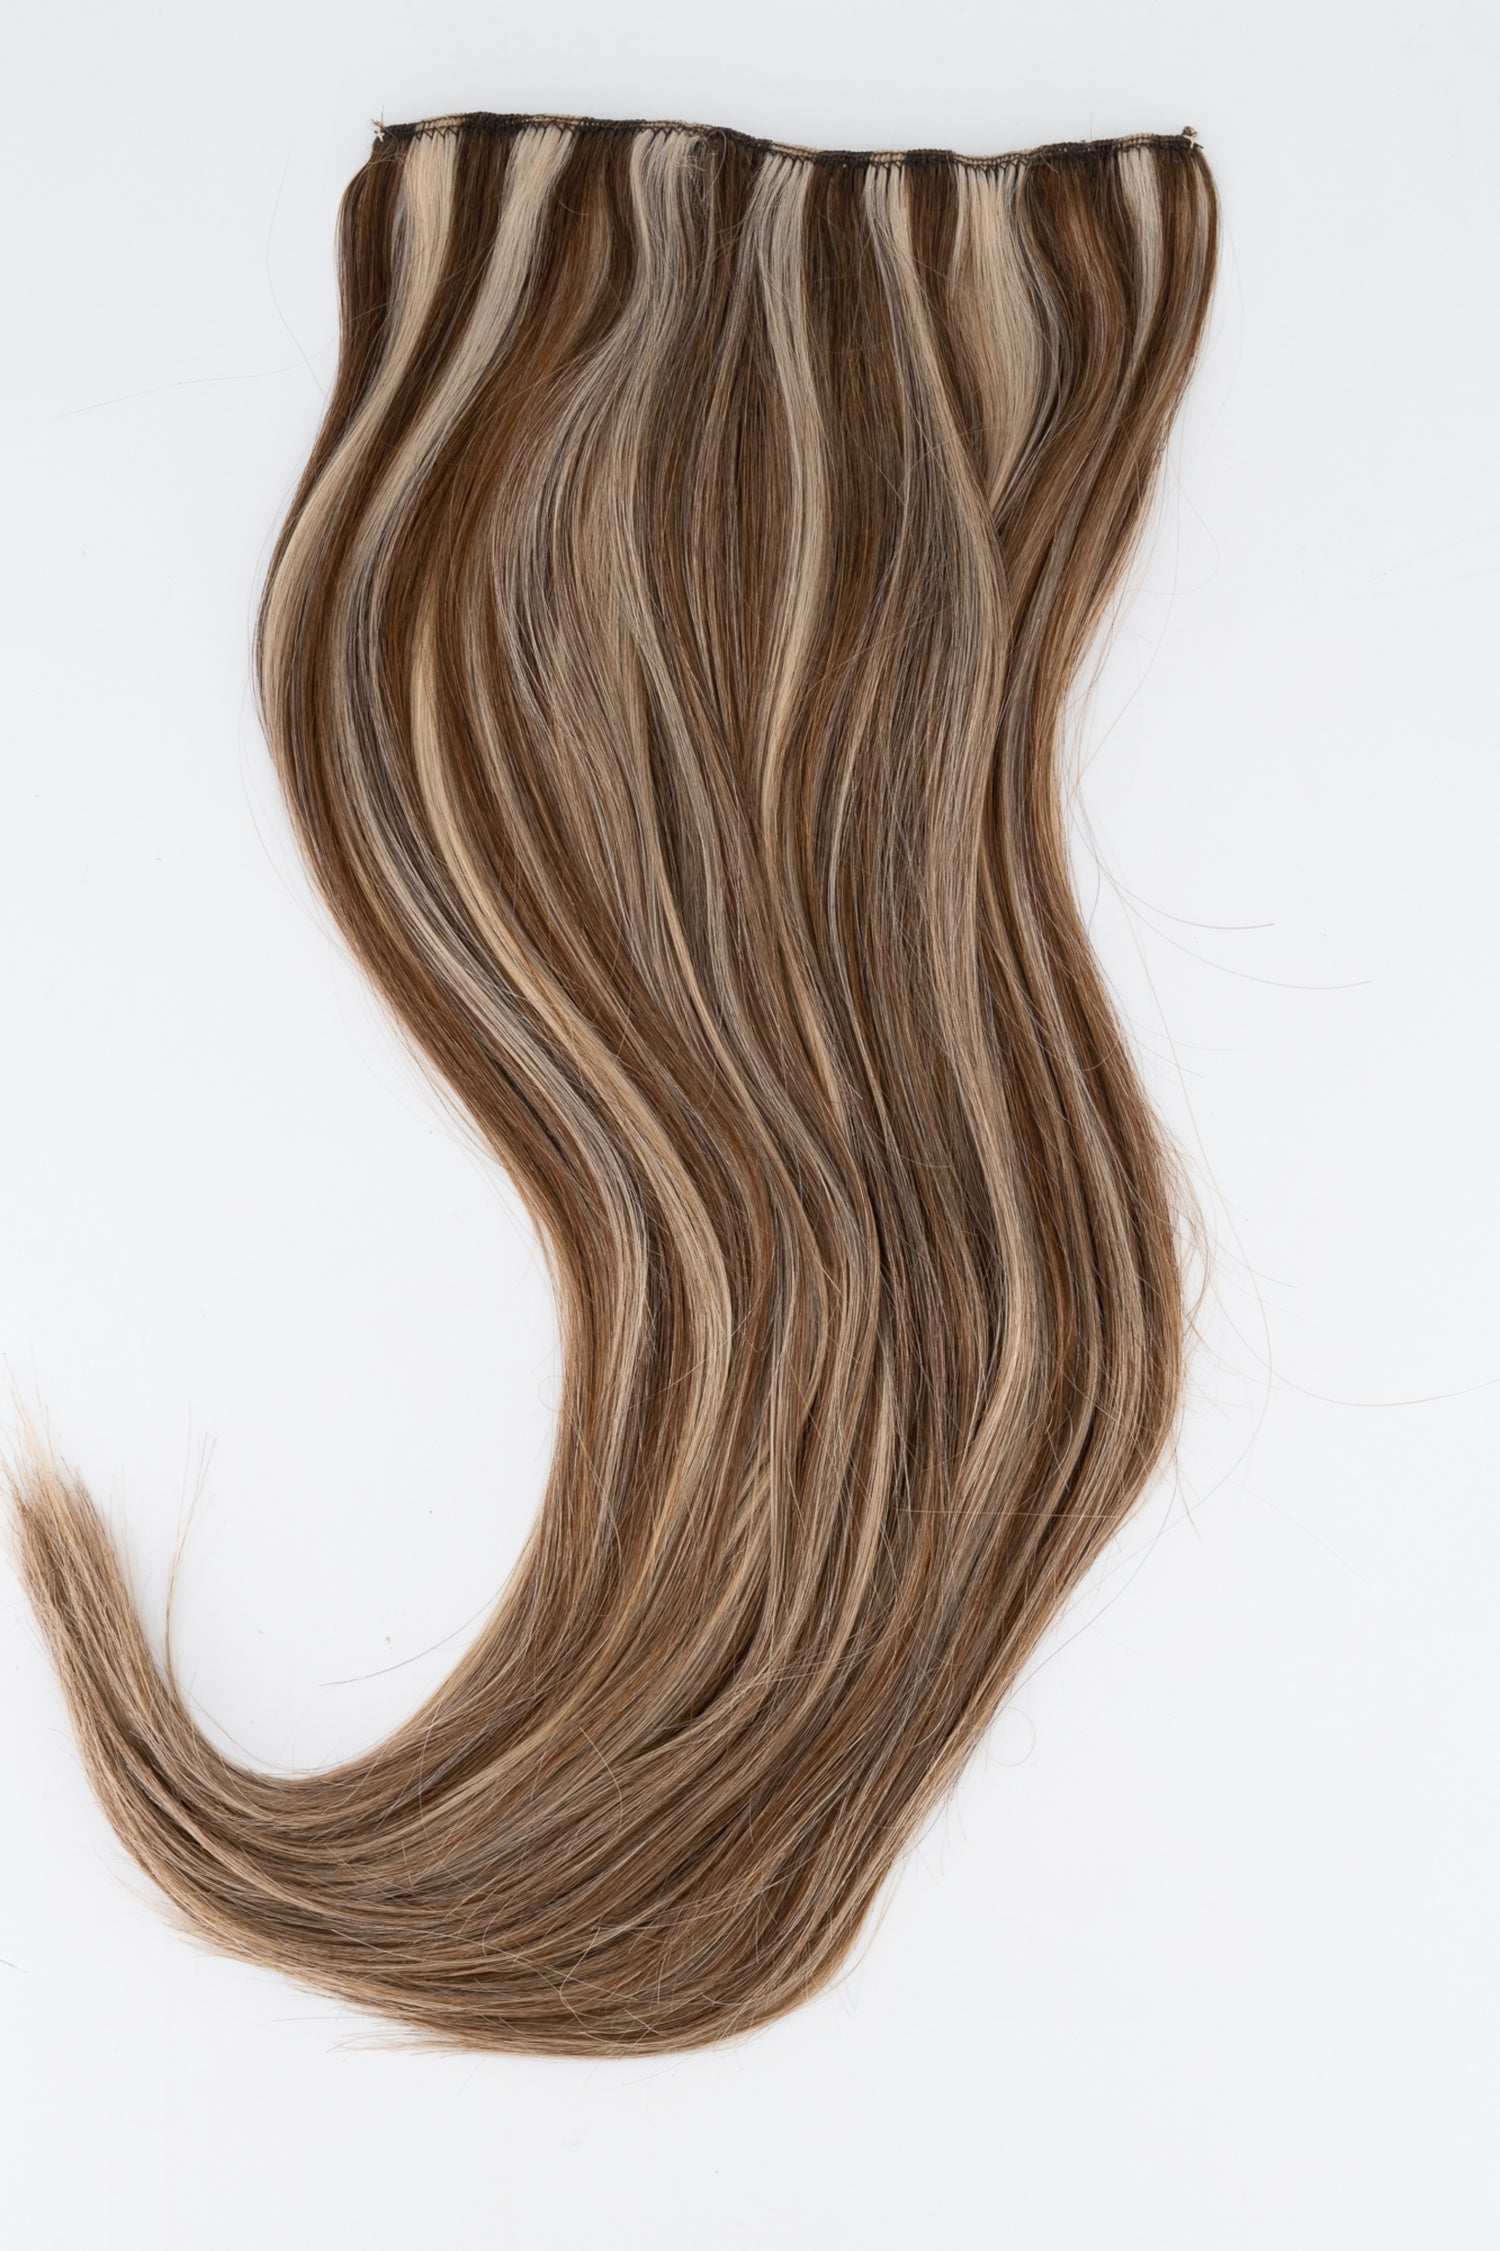 Frontrow clip-in hair extensions in ash brown